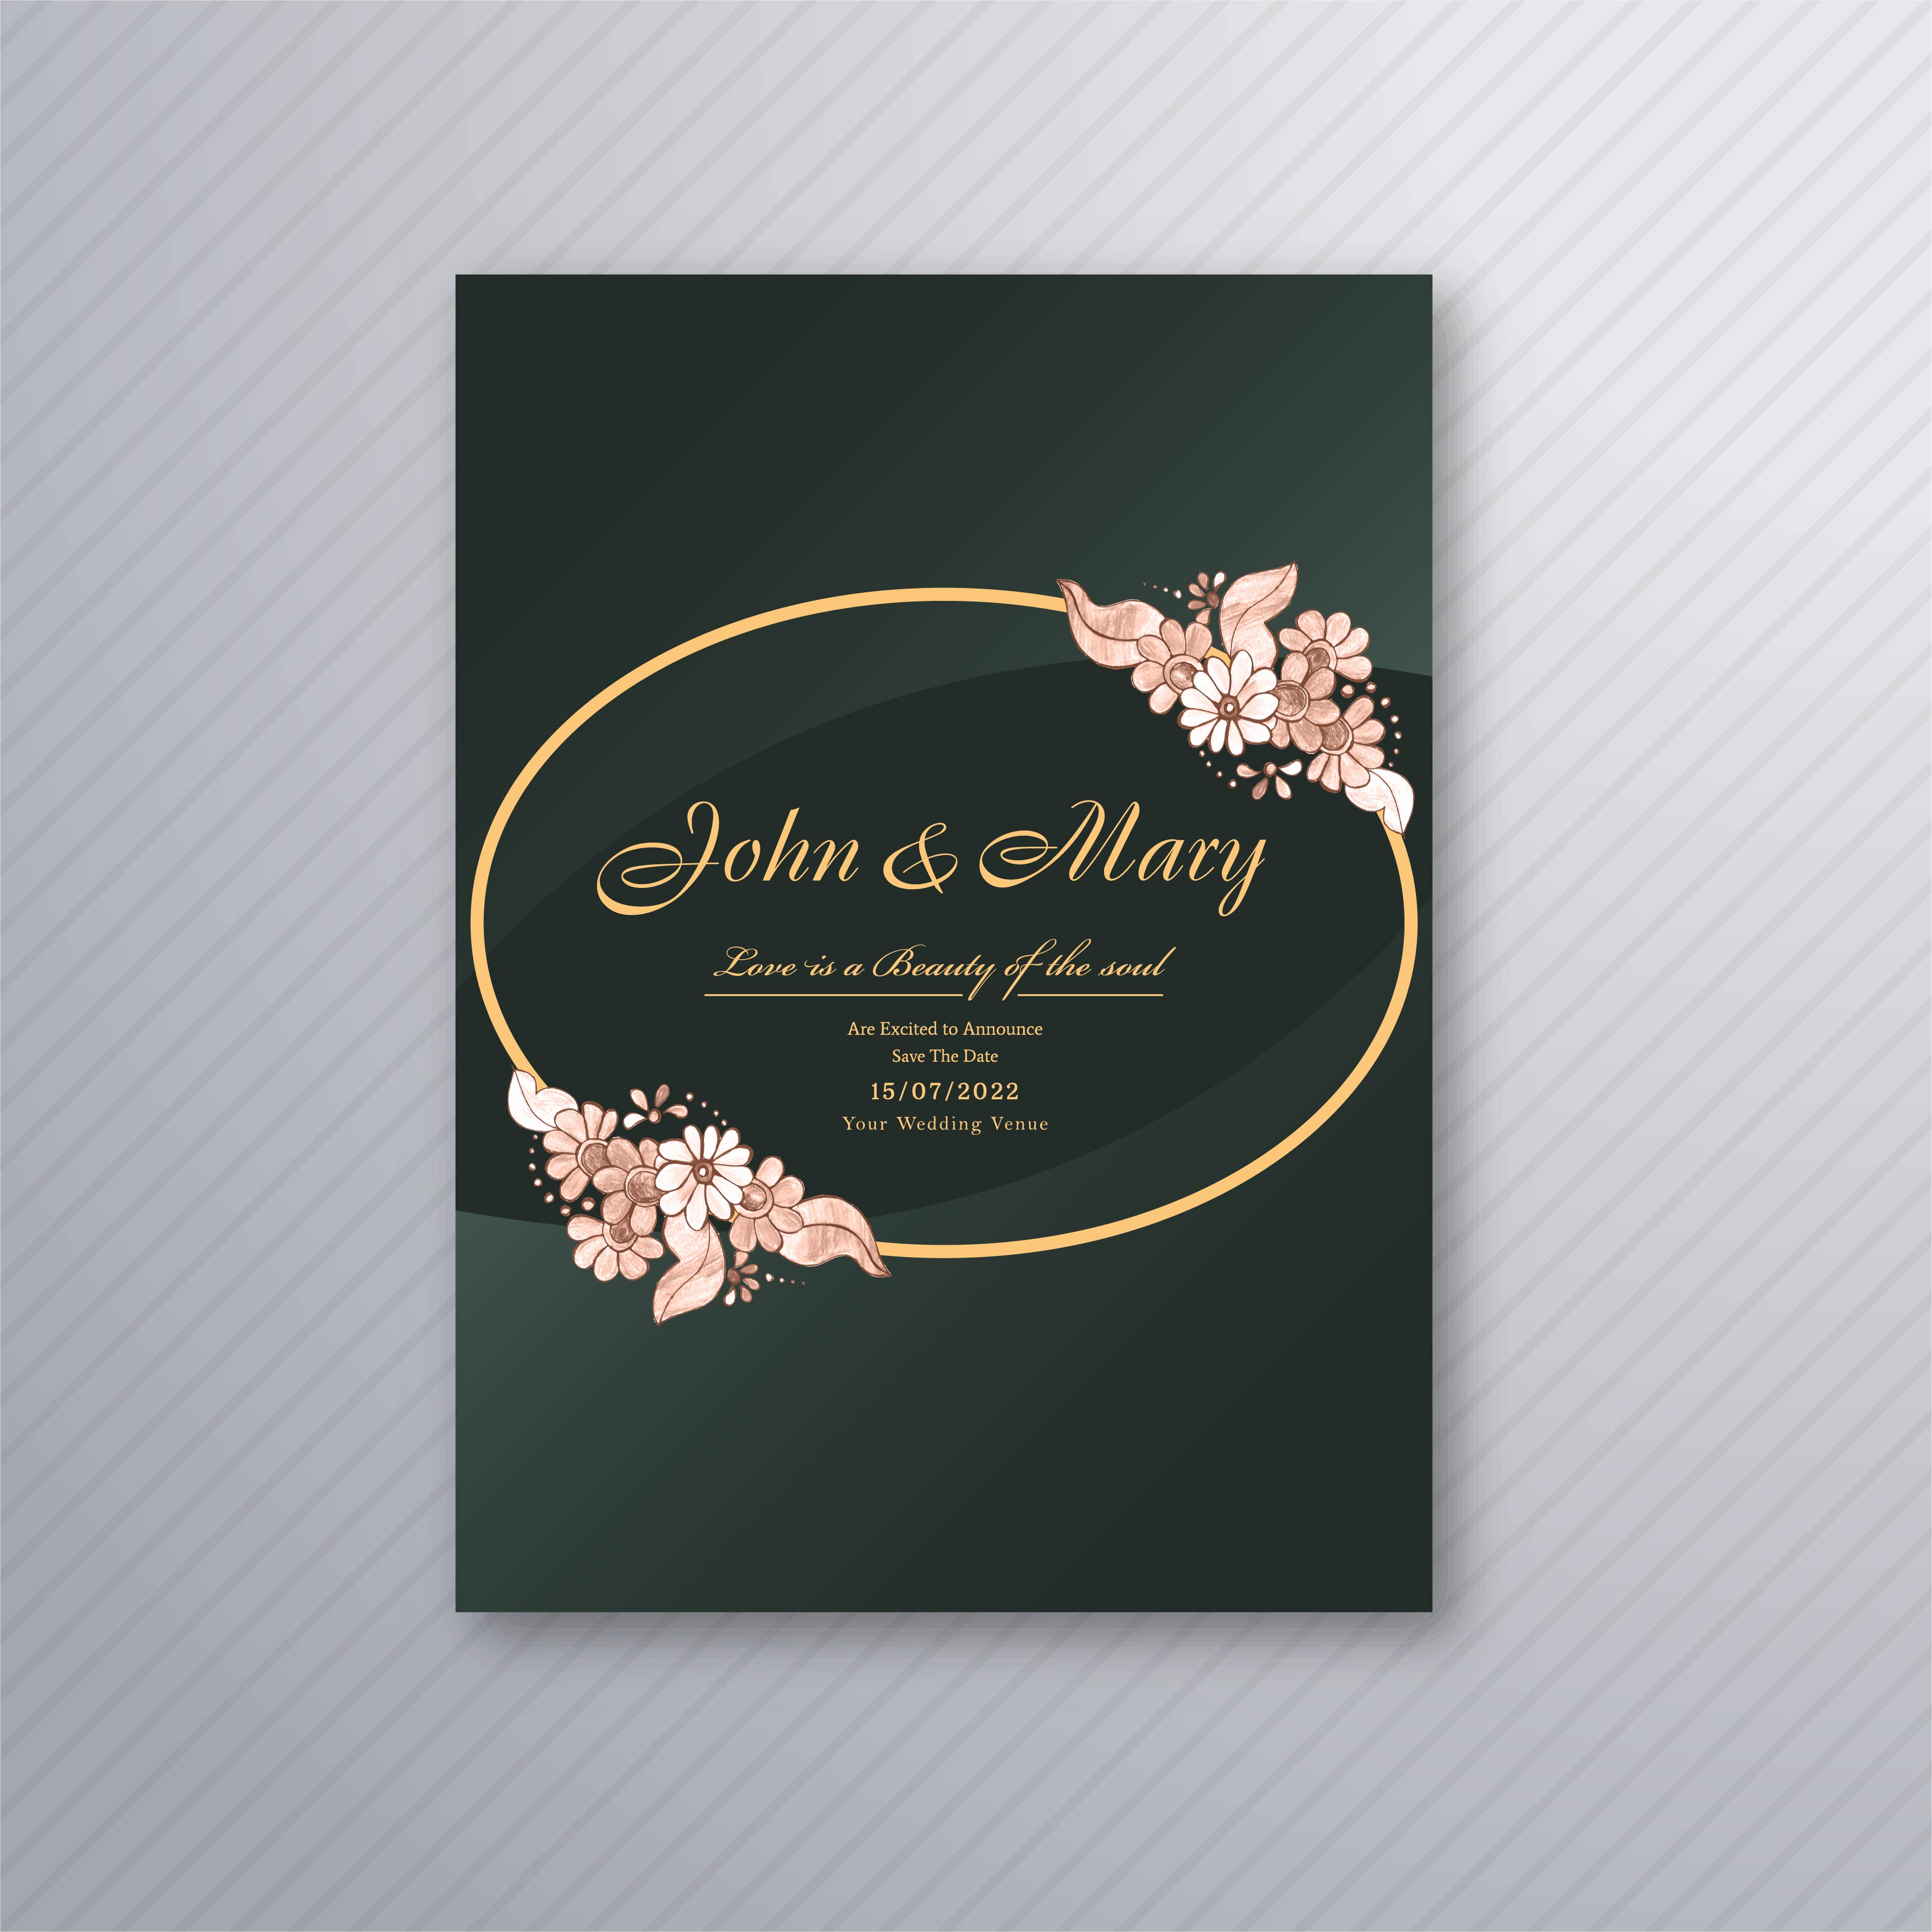 Wedding invitation card template with decorative floral backgrou 249227 - Download Free Vectors 